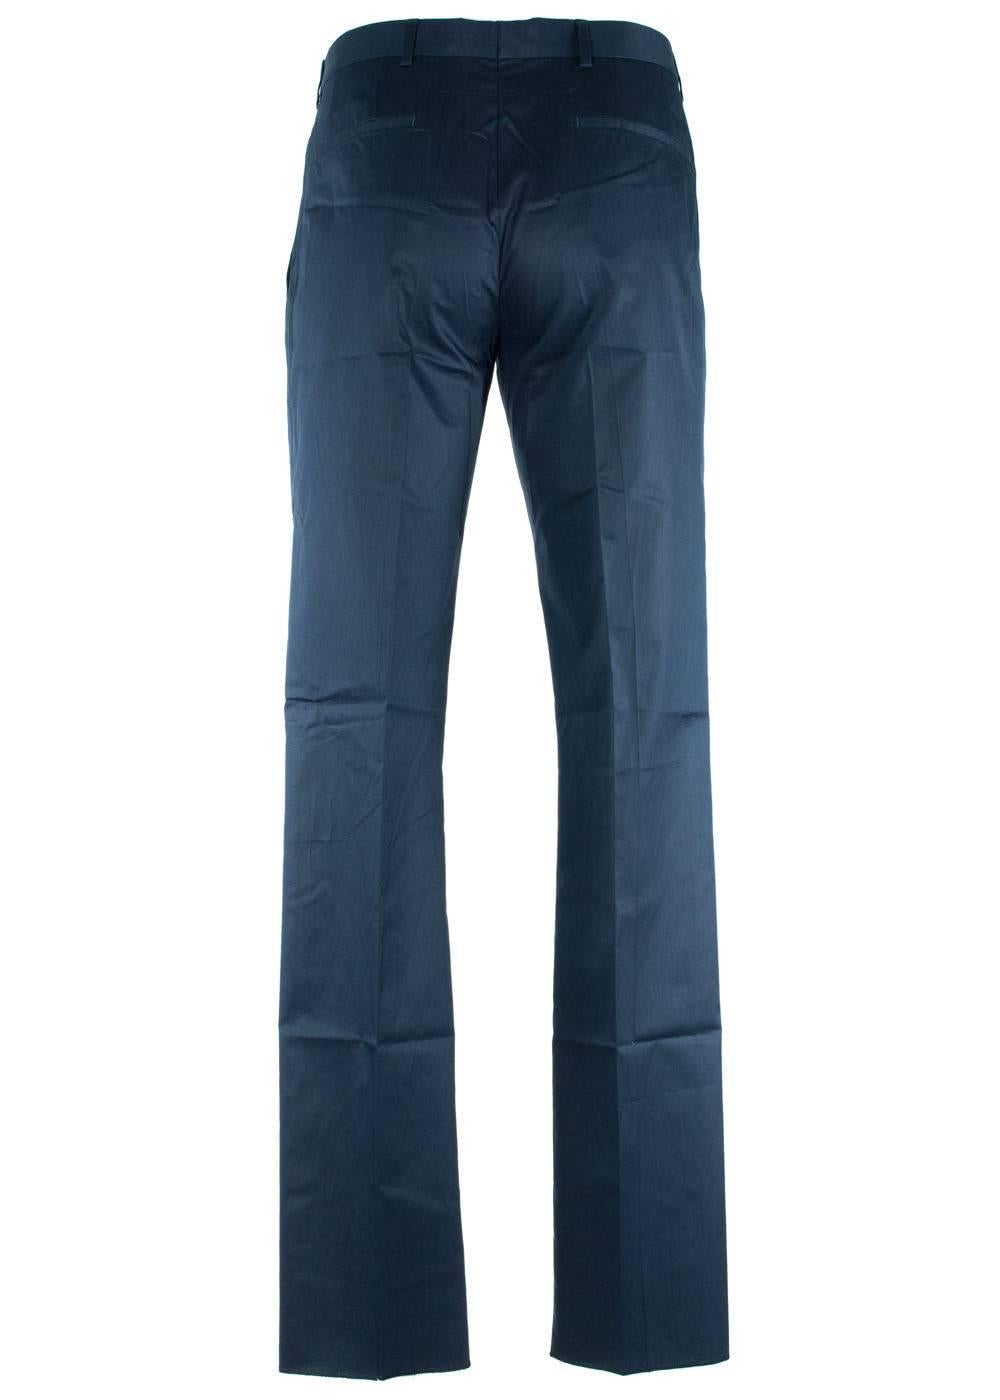 Black Givenchy Men's 100% Cotton Solid Navy Trousers  For Sale